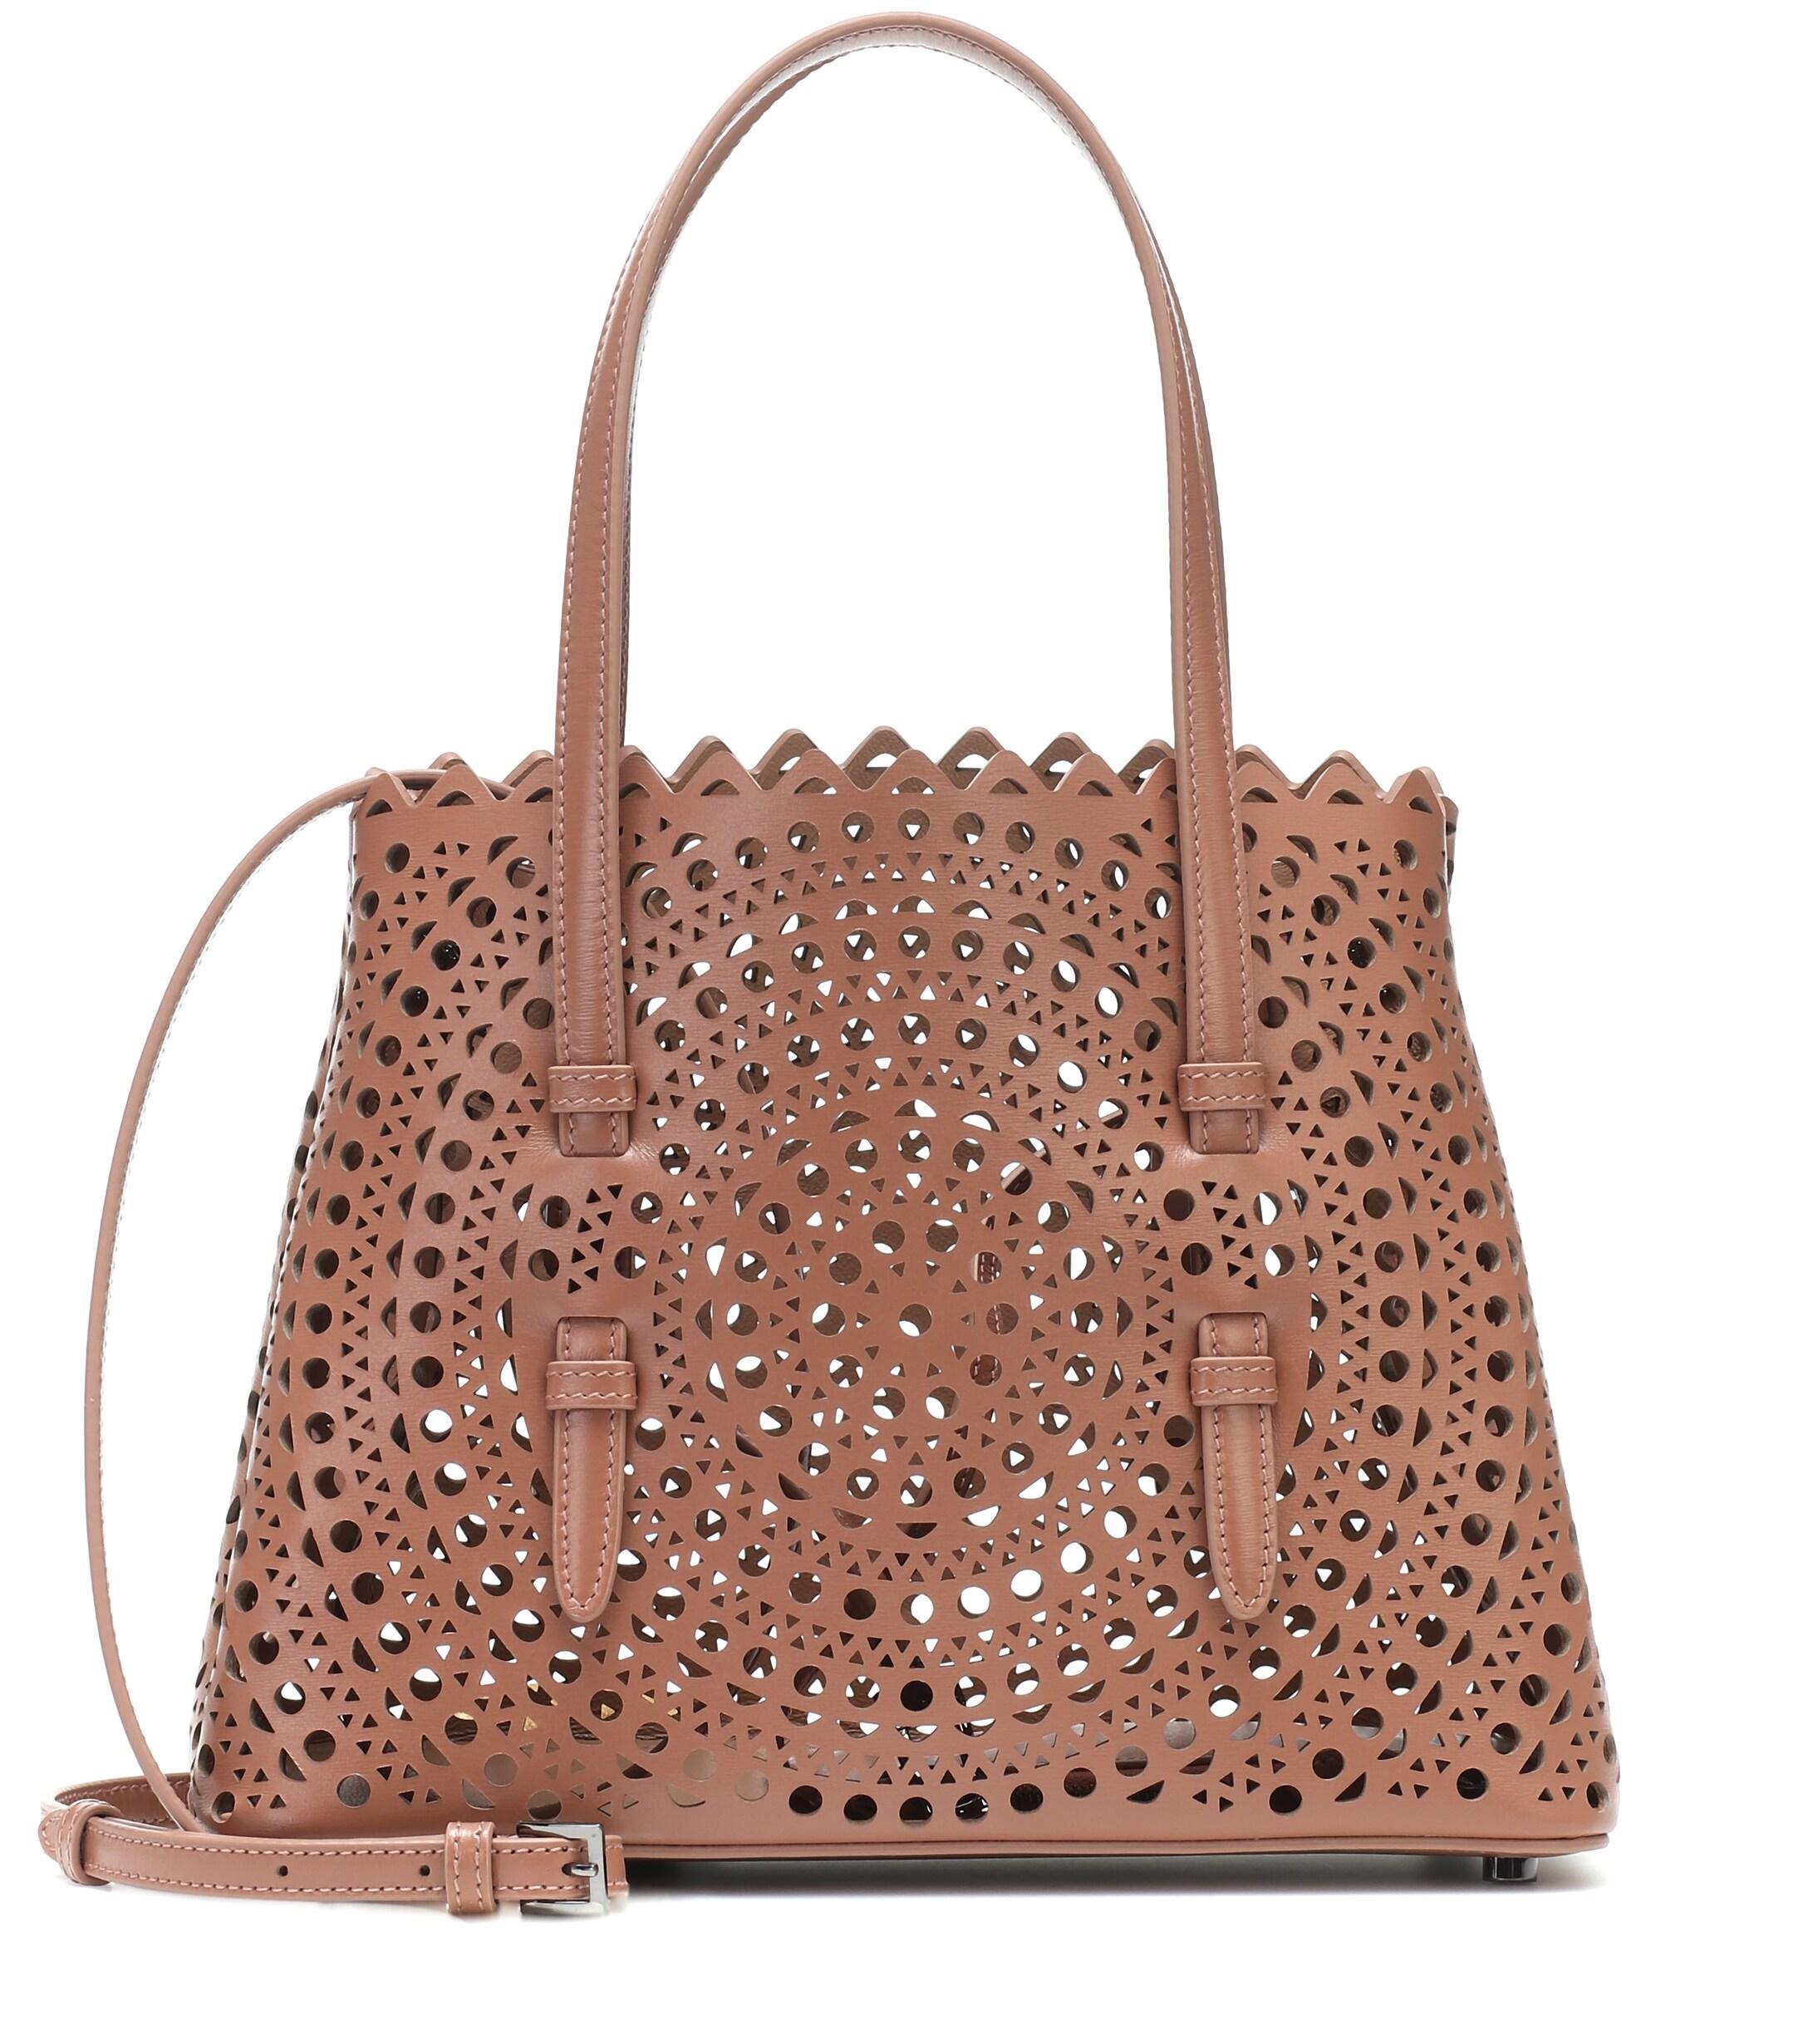 Alaïa Mina 25 Small Leather Tote in Brown | Lyst